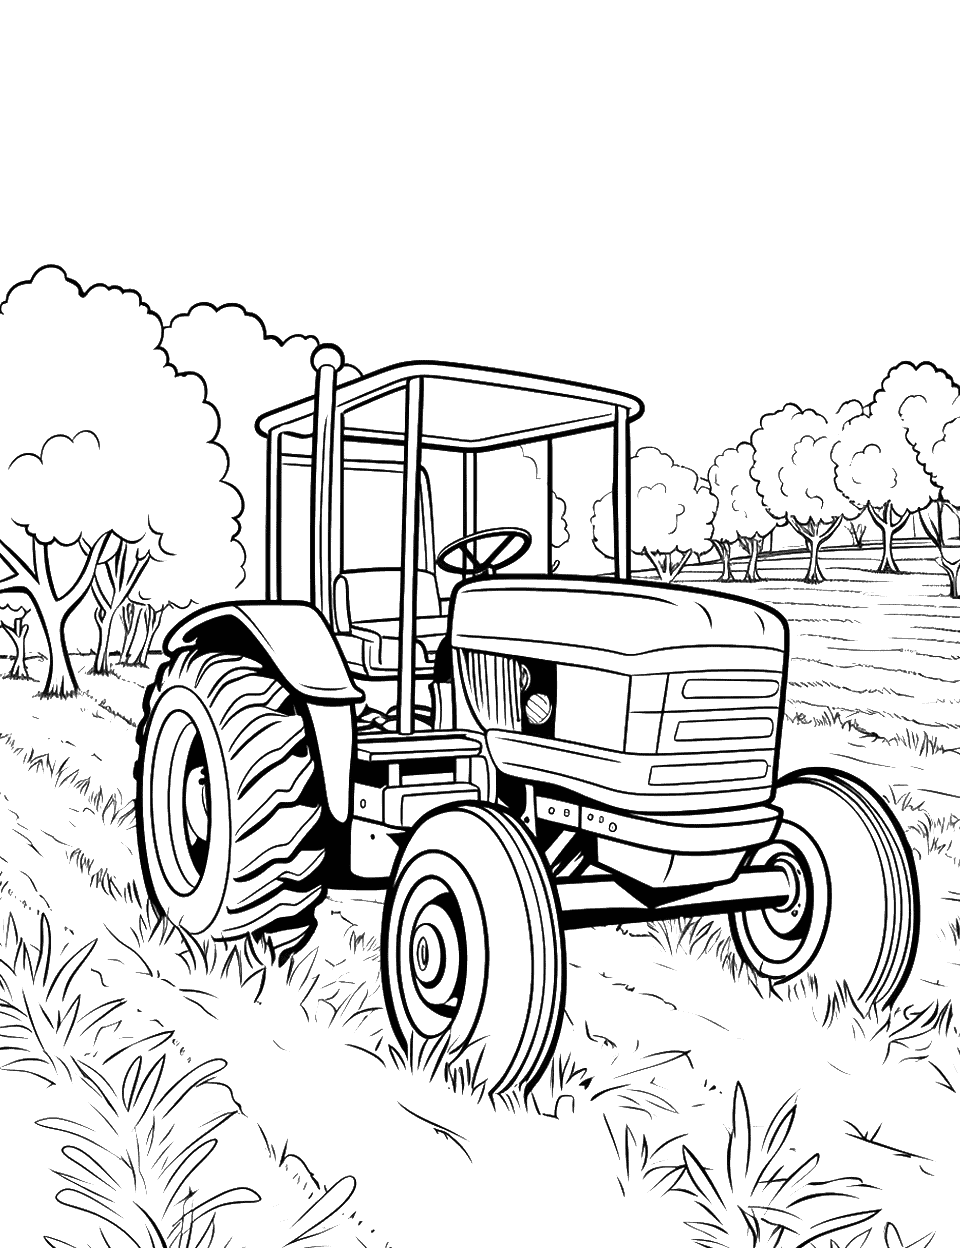 Tractor in the Orchard Coloring Page - A tractor maneuvering between rows of fruit trees in an orchard.